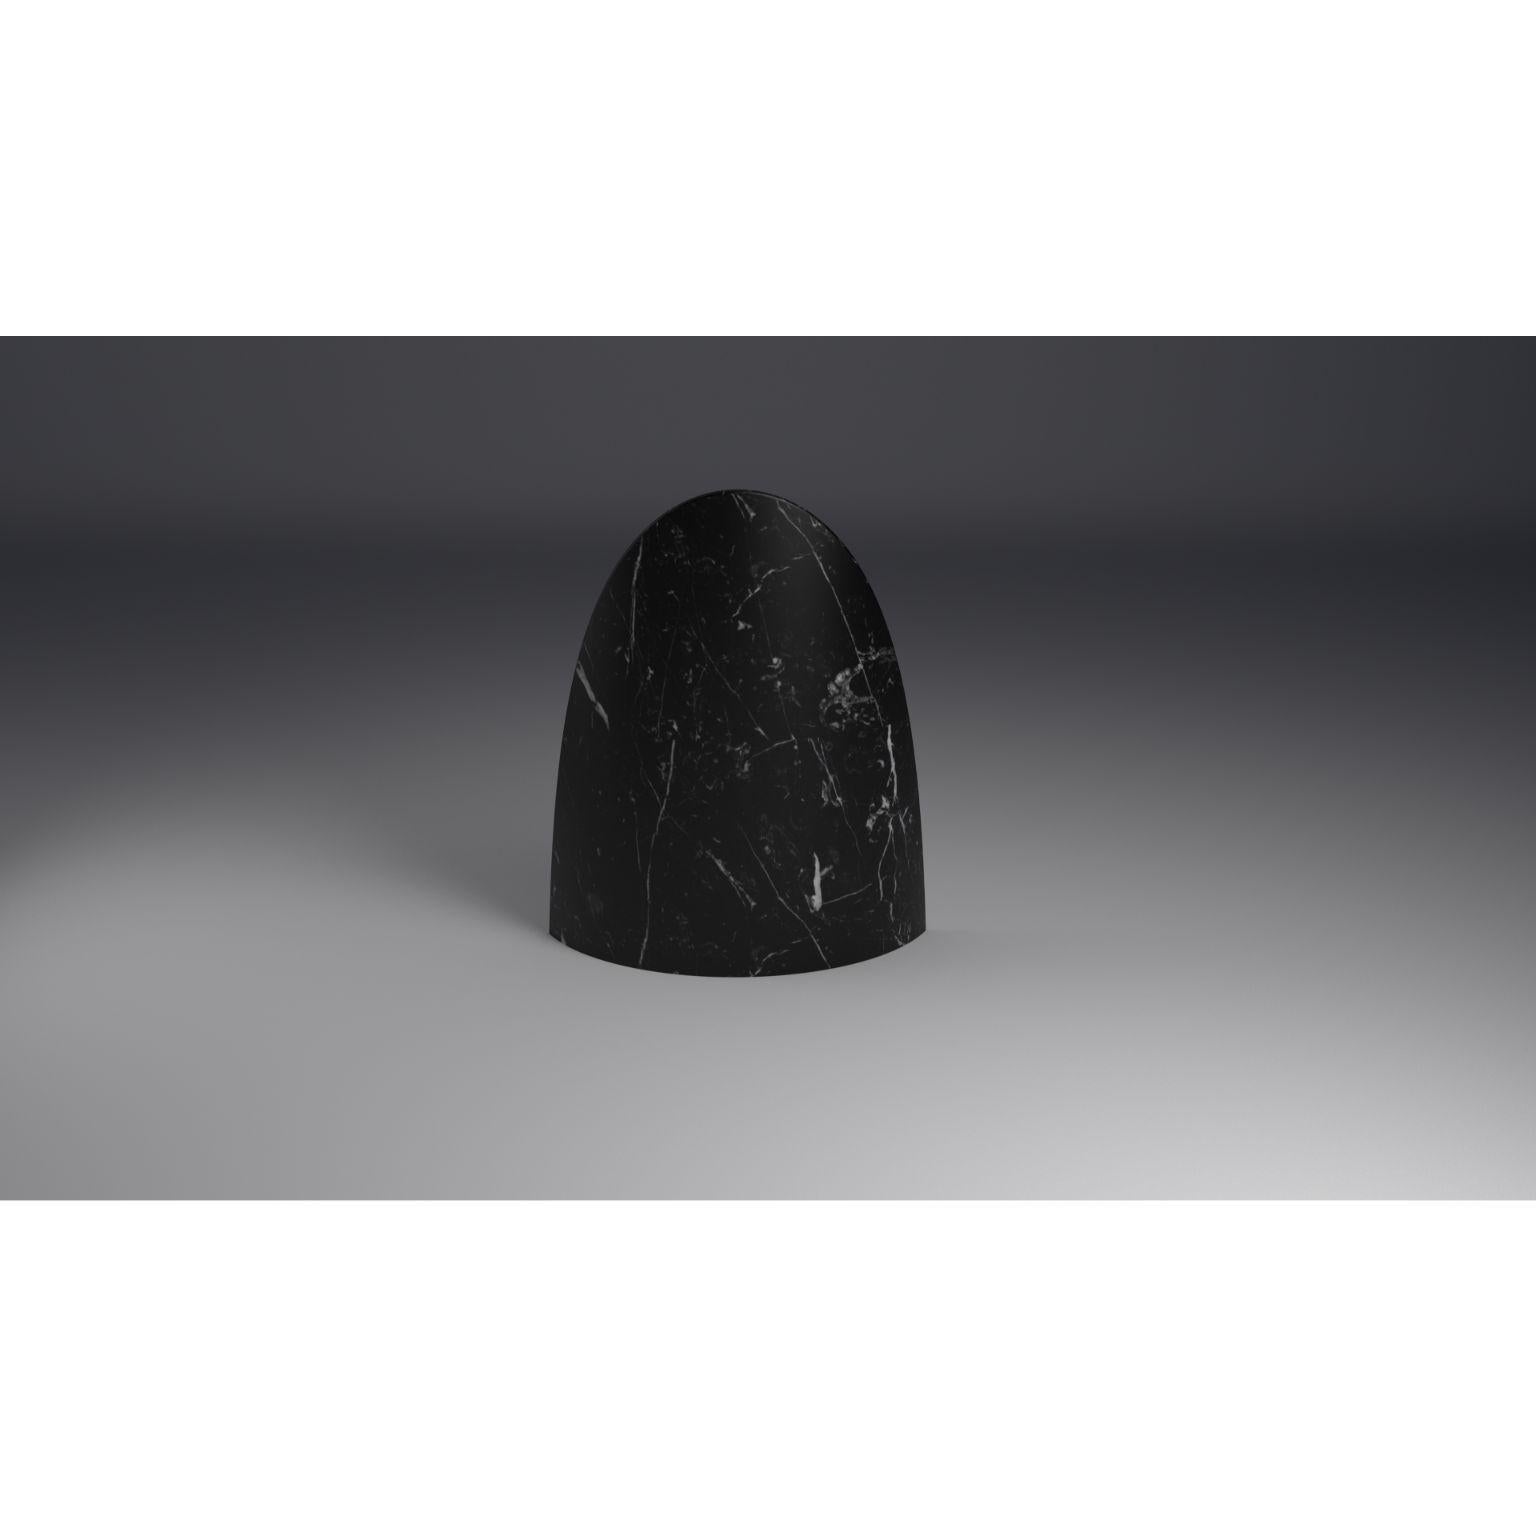 Ula Sculpture Black Plant Holder by Veronica Mar
Dimensions: D70 x W40 x H90 cm
Materials: Marble
Weight: 50 kg.
Numbered and limited edition

Ula Sculpture Plant holder can be a bespoke piece. Custom Dimensions and type of marble Available